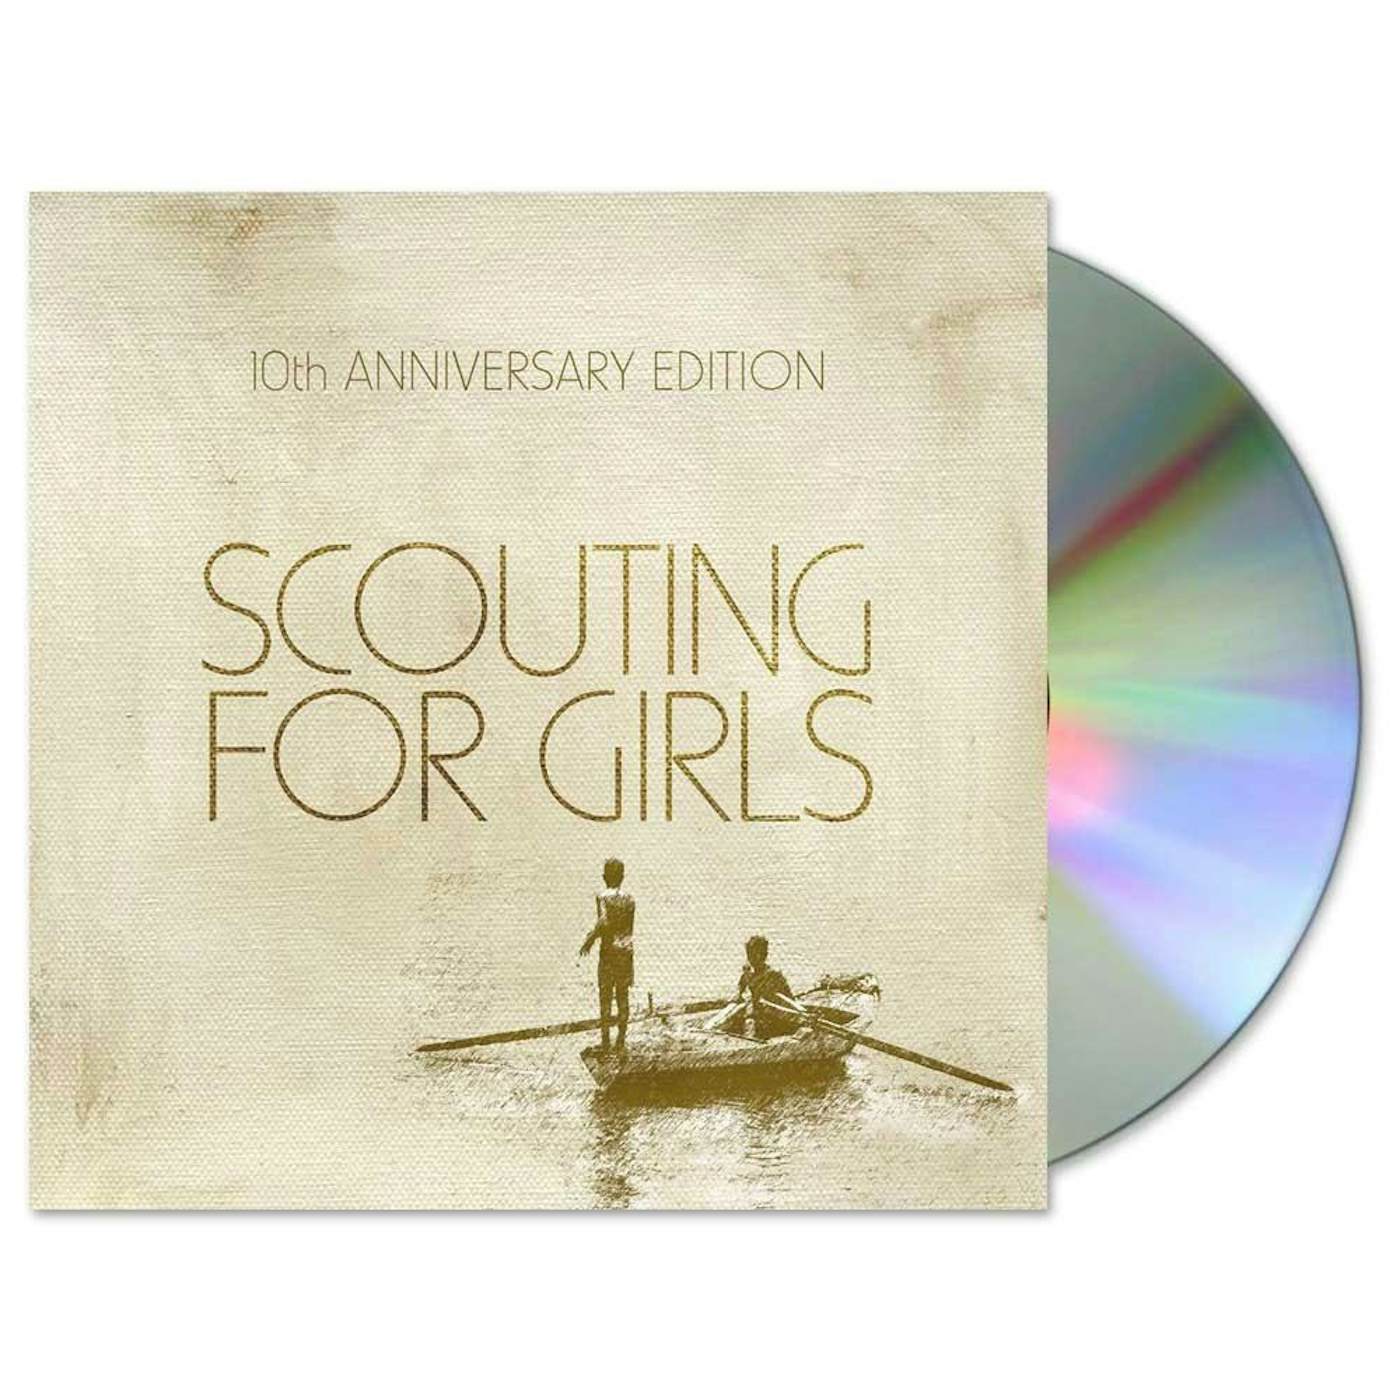 SCOUTING FOR GIRLS 10TH ANNIVERSARY EDITION - 2CD